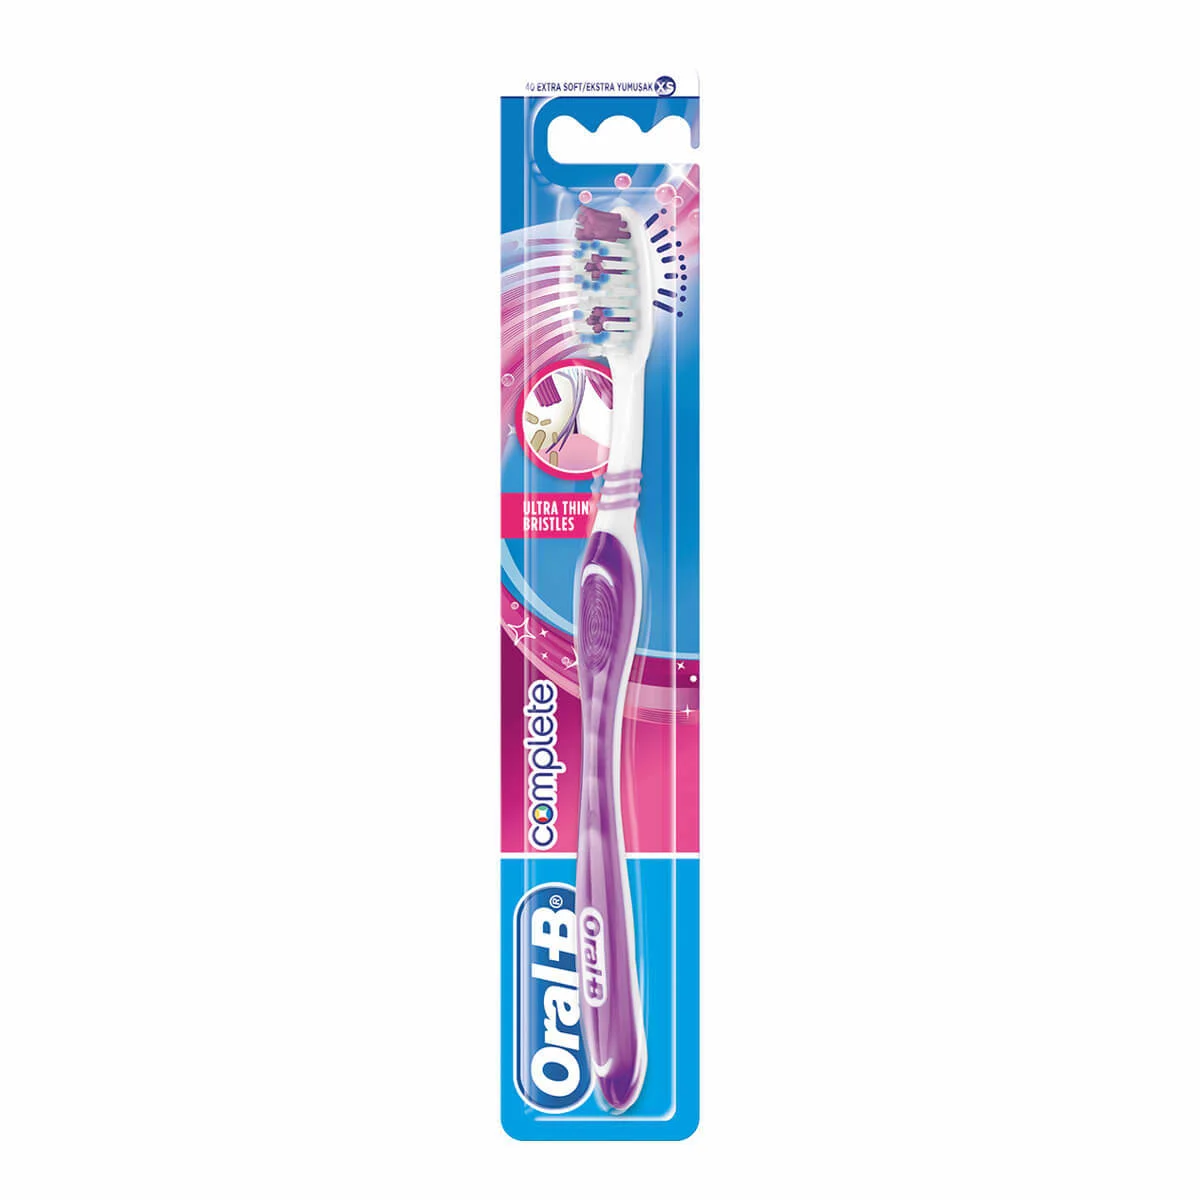 Oral-B Complete Ultra Thin Bristles Manual Toothbrush 